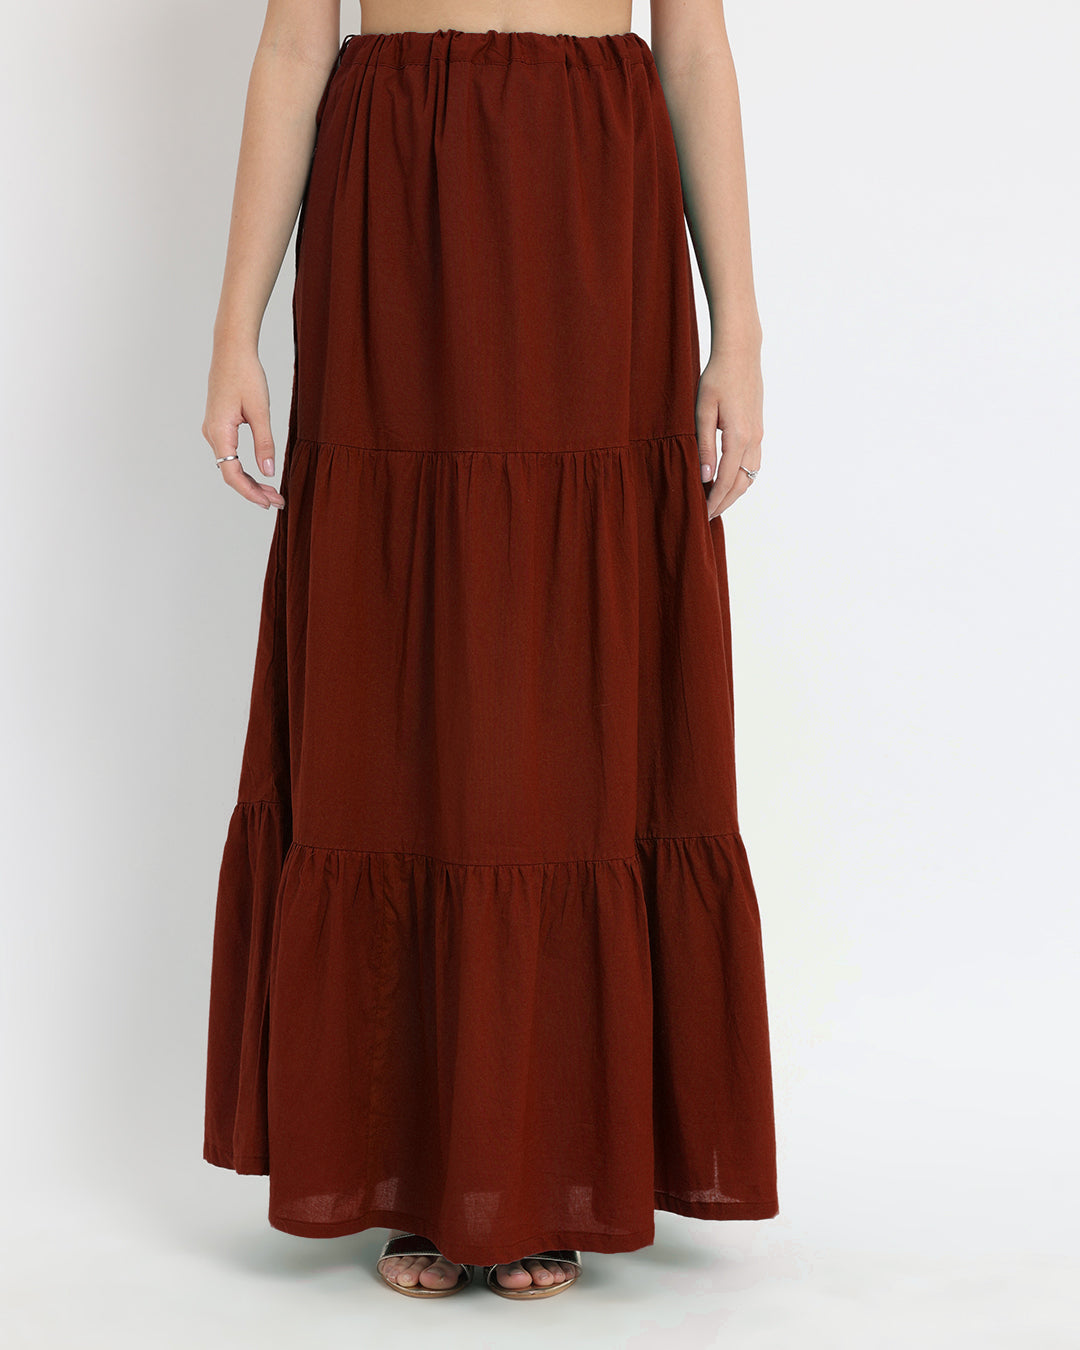 Russet Red Tiered Skirt